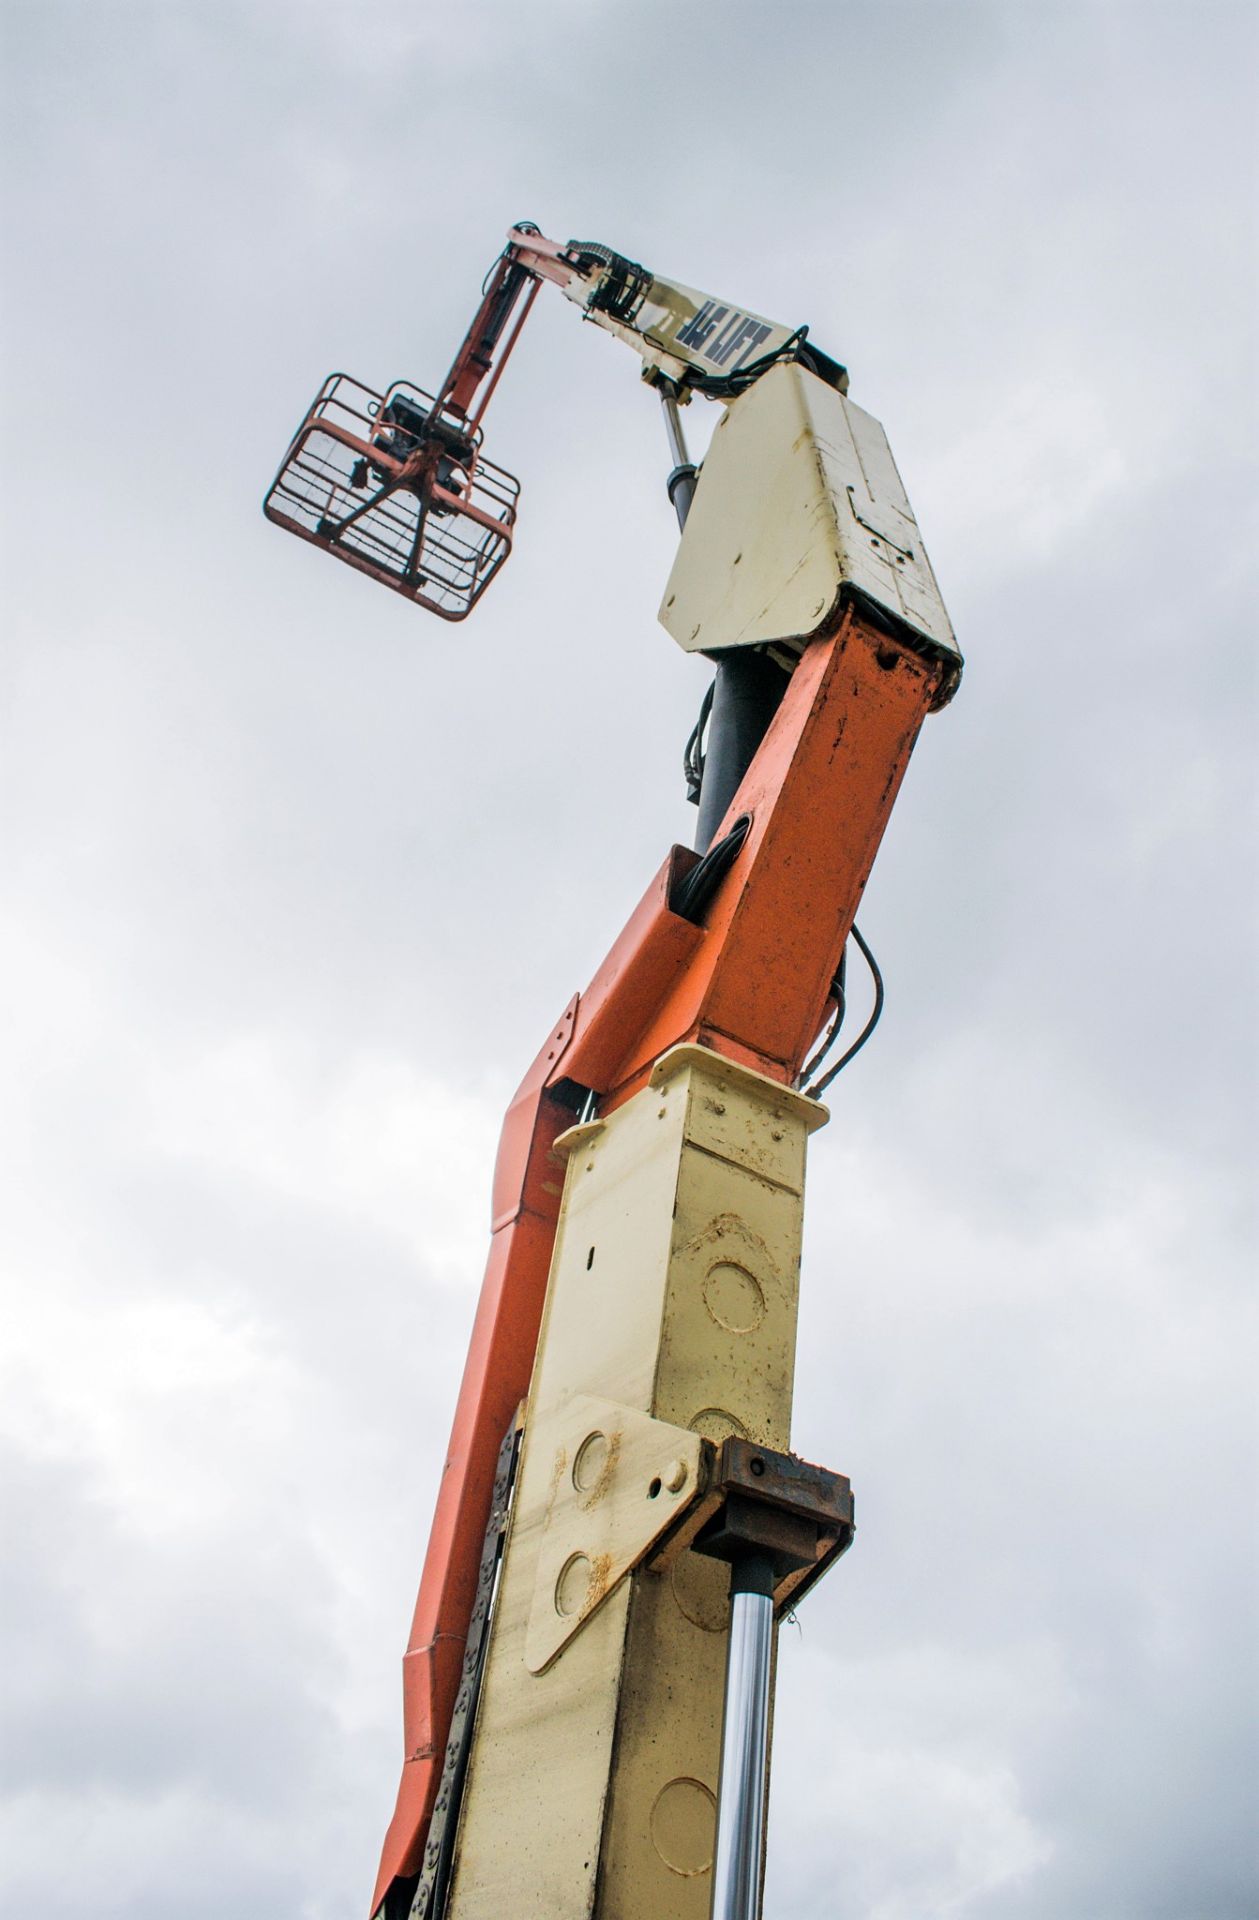 JLG 600AJ diesel driven 4WD articulated boom access platform Year: 2007 S/N: 23275 Recorded Hours: - Image 13 of 17